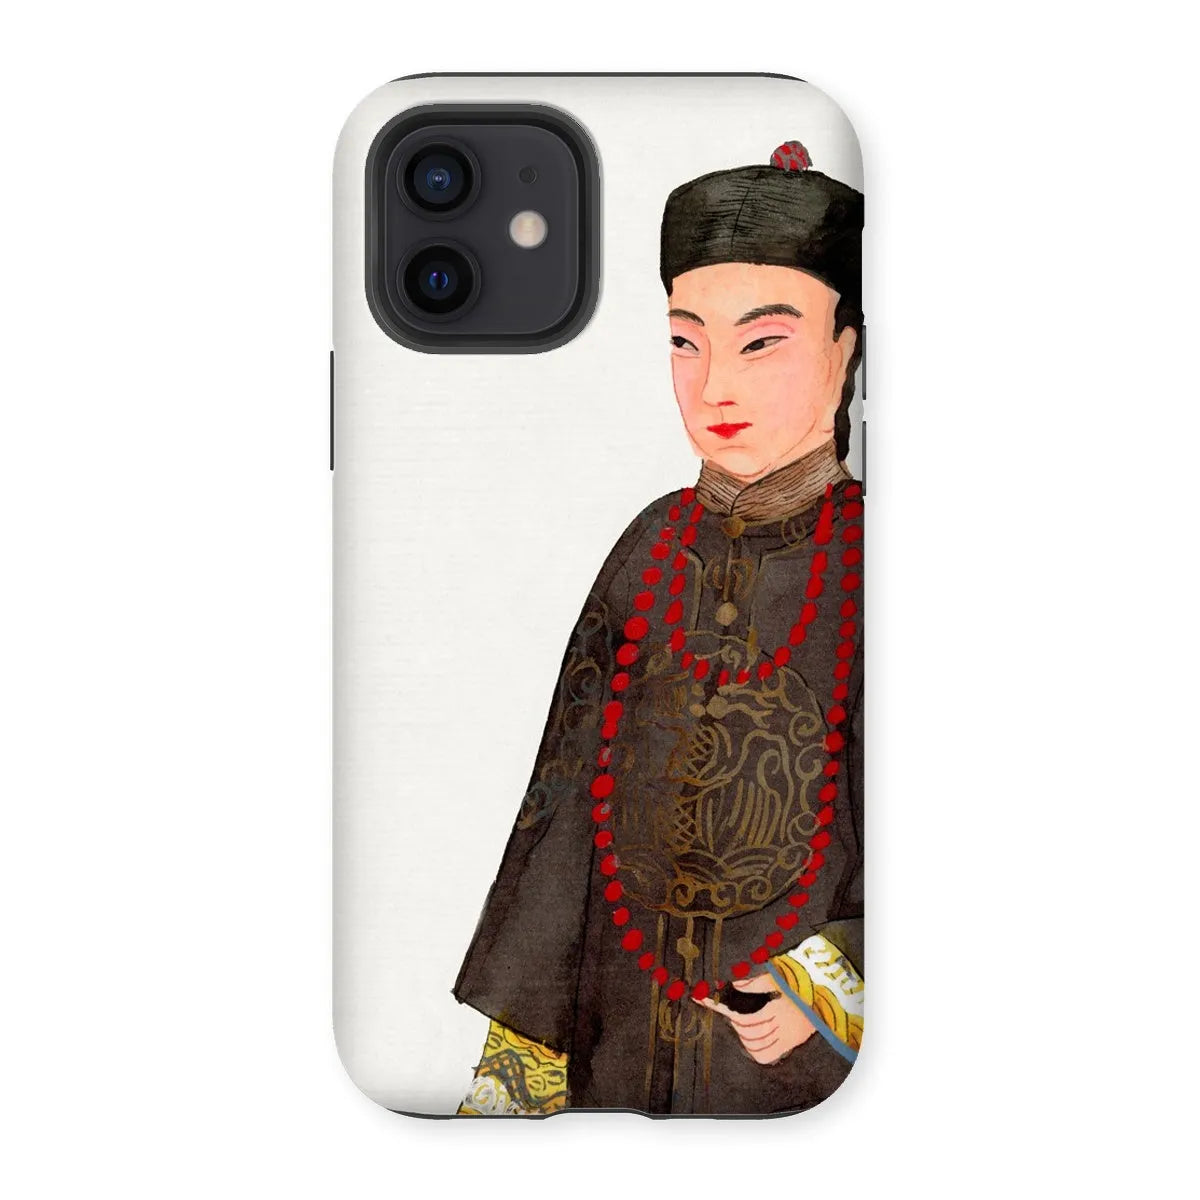 Emperor’s Courtier - Chinese Manchu Aesthetic Art Phone Case - Iphone 12 / Matte - Mobile Phone Cases - Aesthetic Art